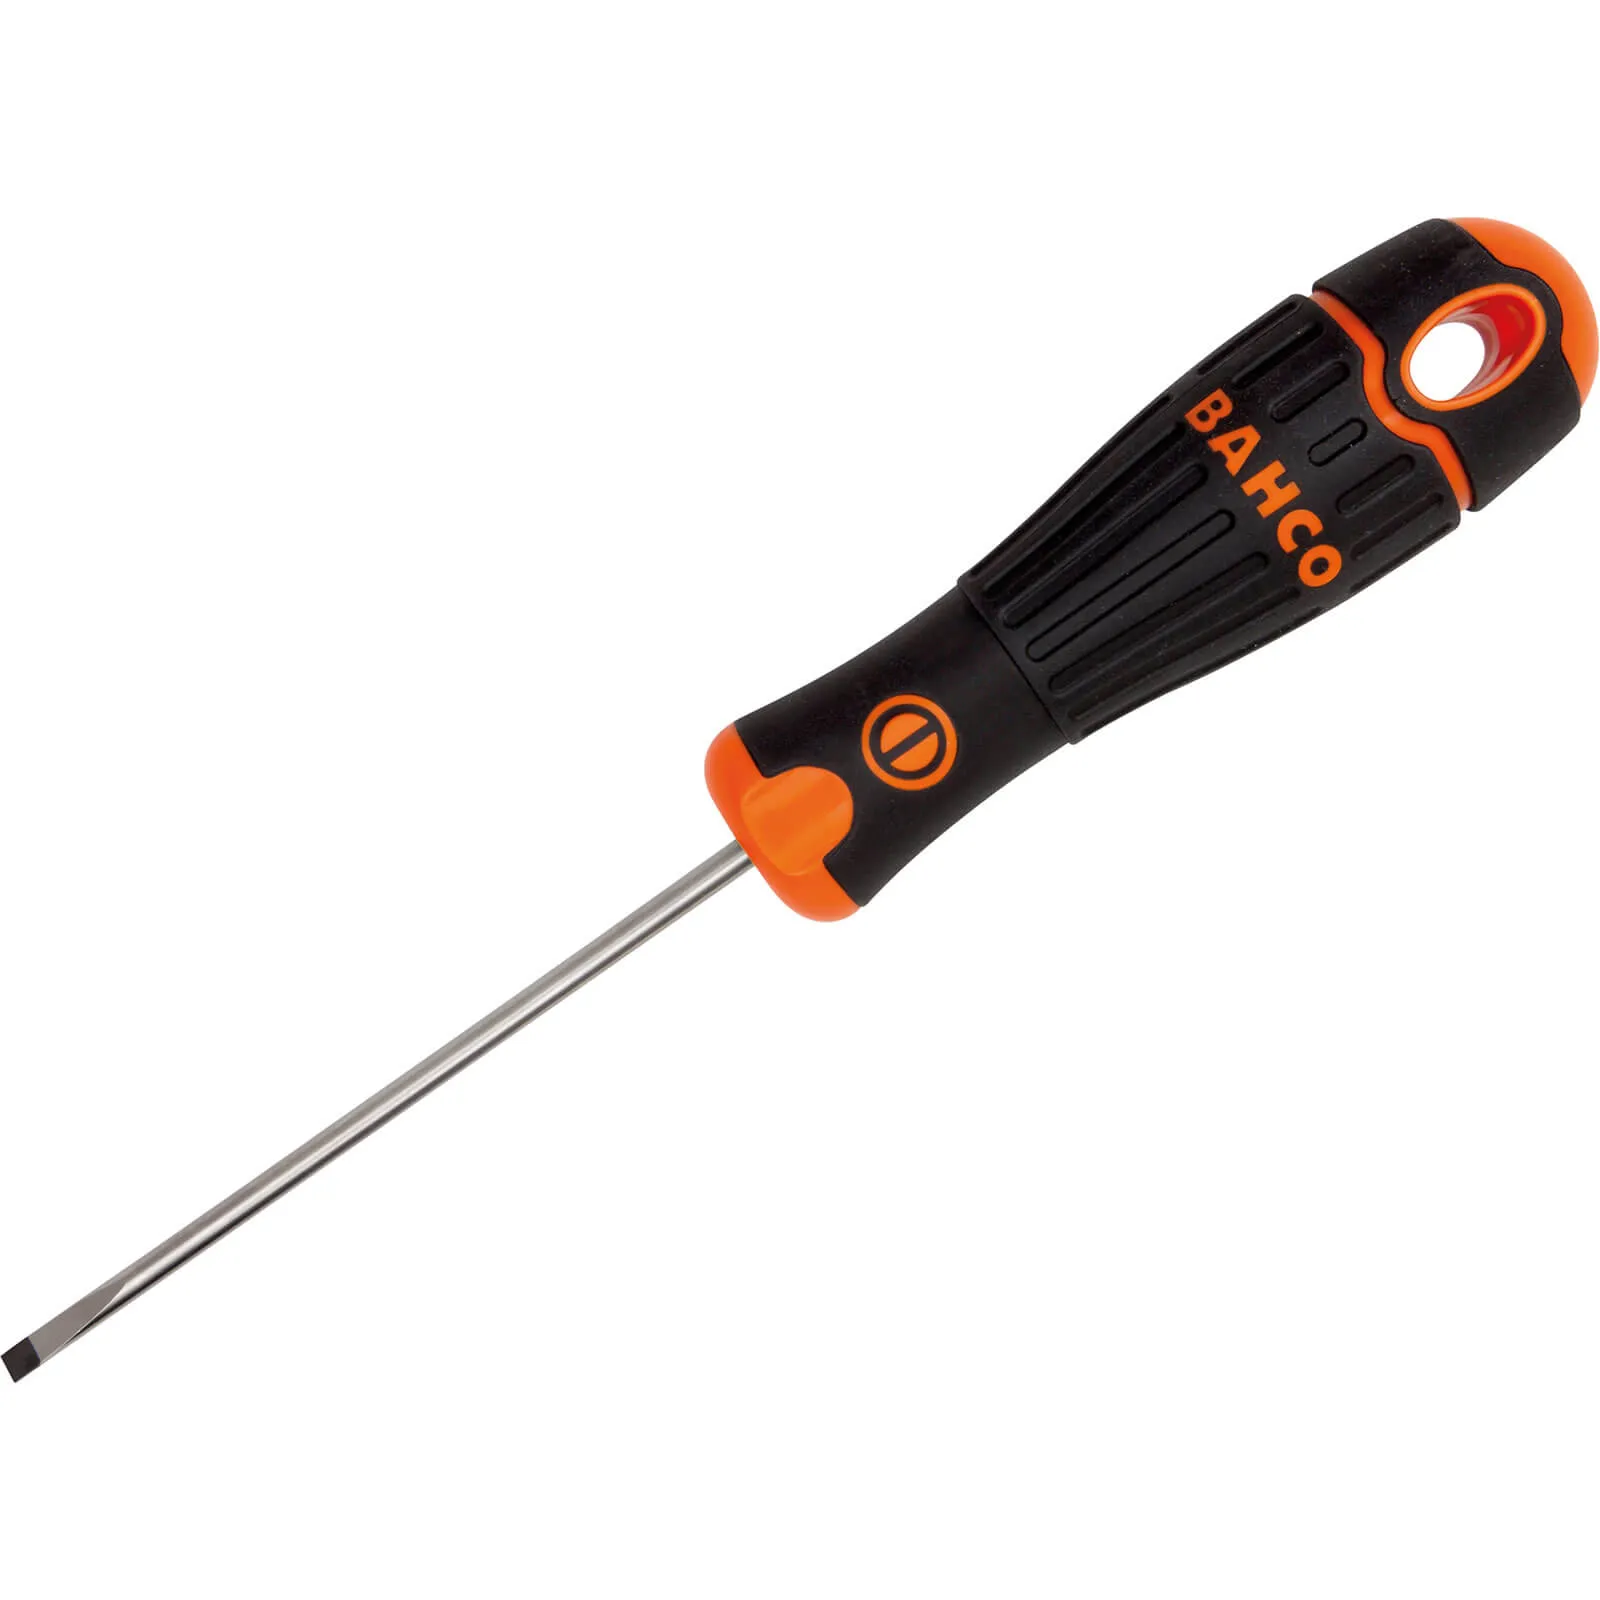 Bahco COFIT Parallel Slotted Screwdriver - 3mm, 200mm